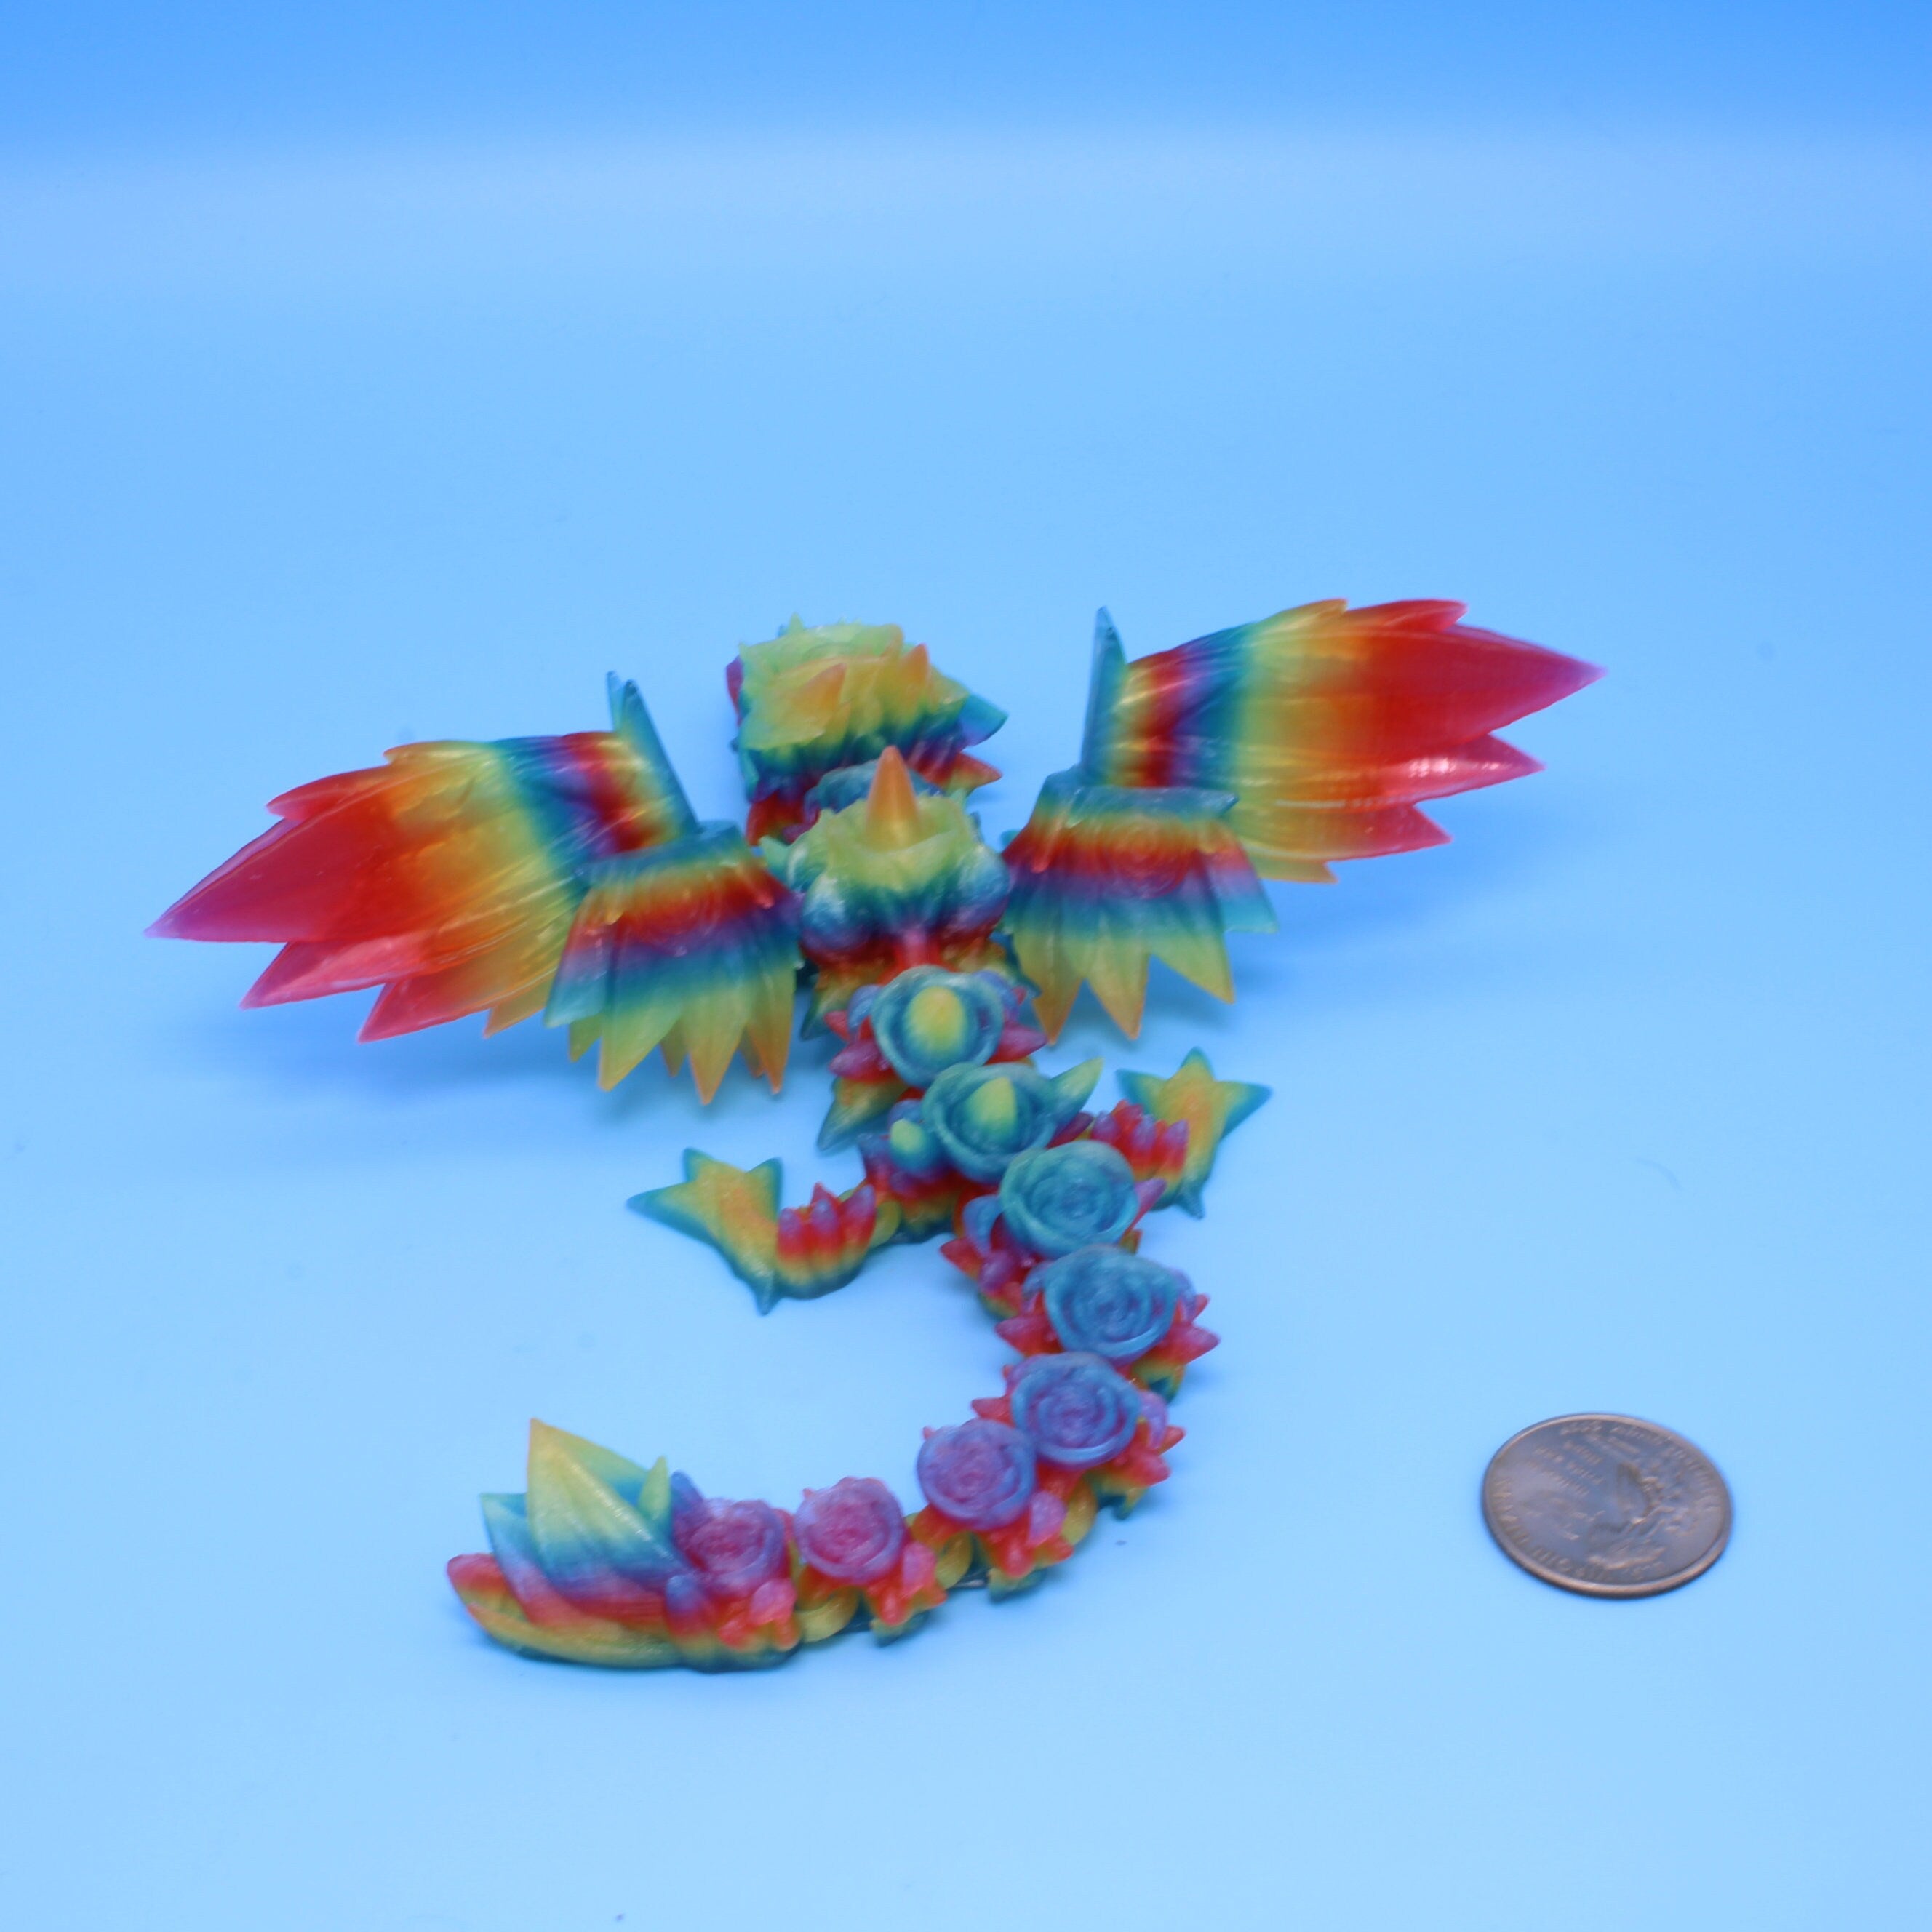 Dragons - Baby Rose wing / Crystal Wing